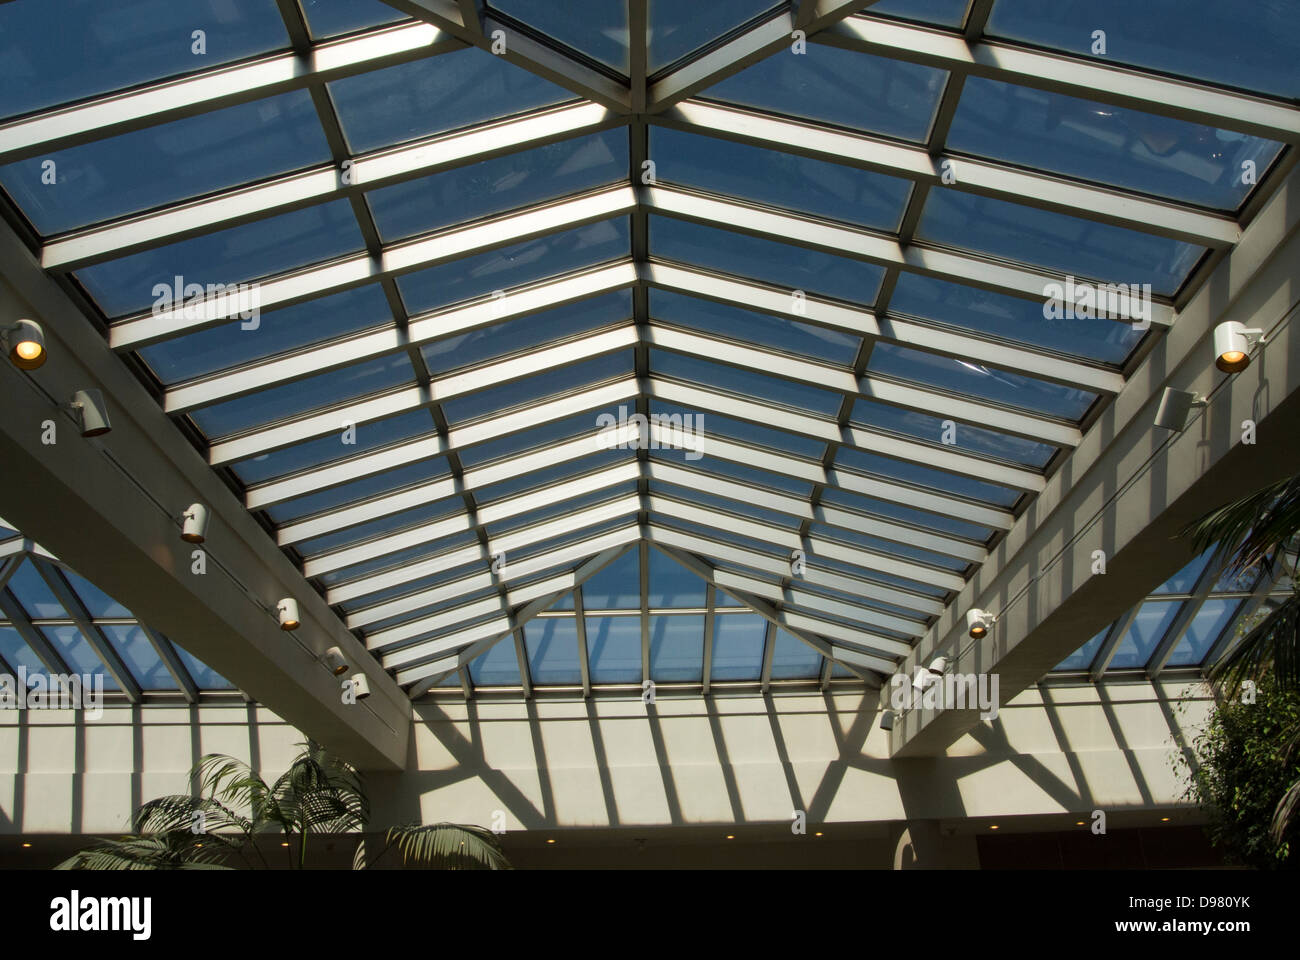 Glass ceiling in shopping mall. Stock Photo